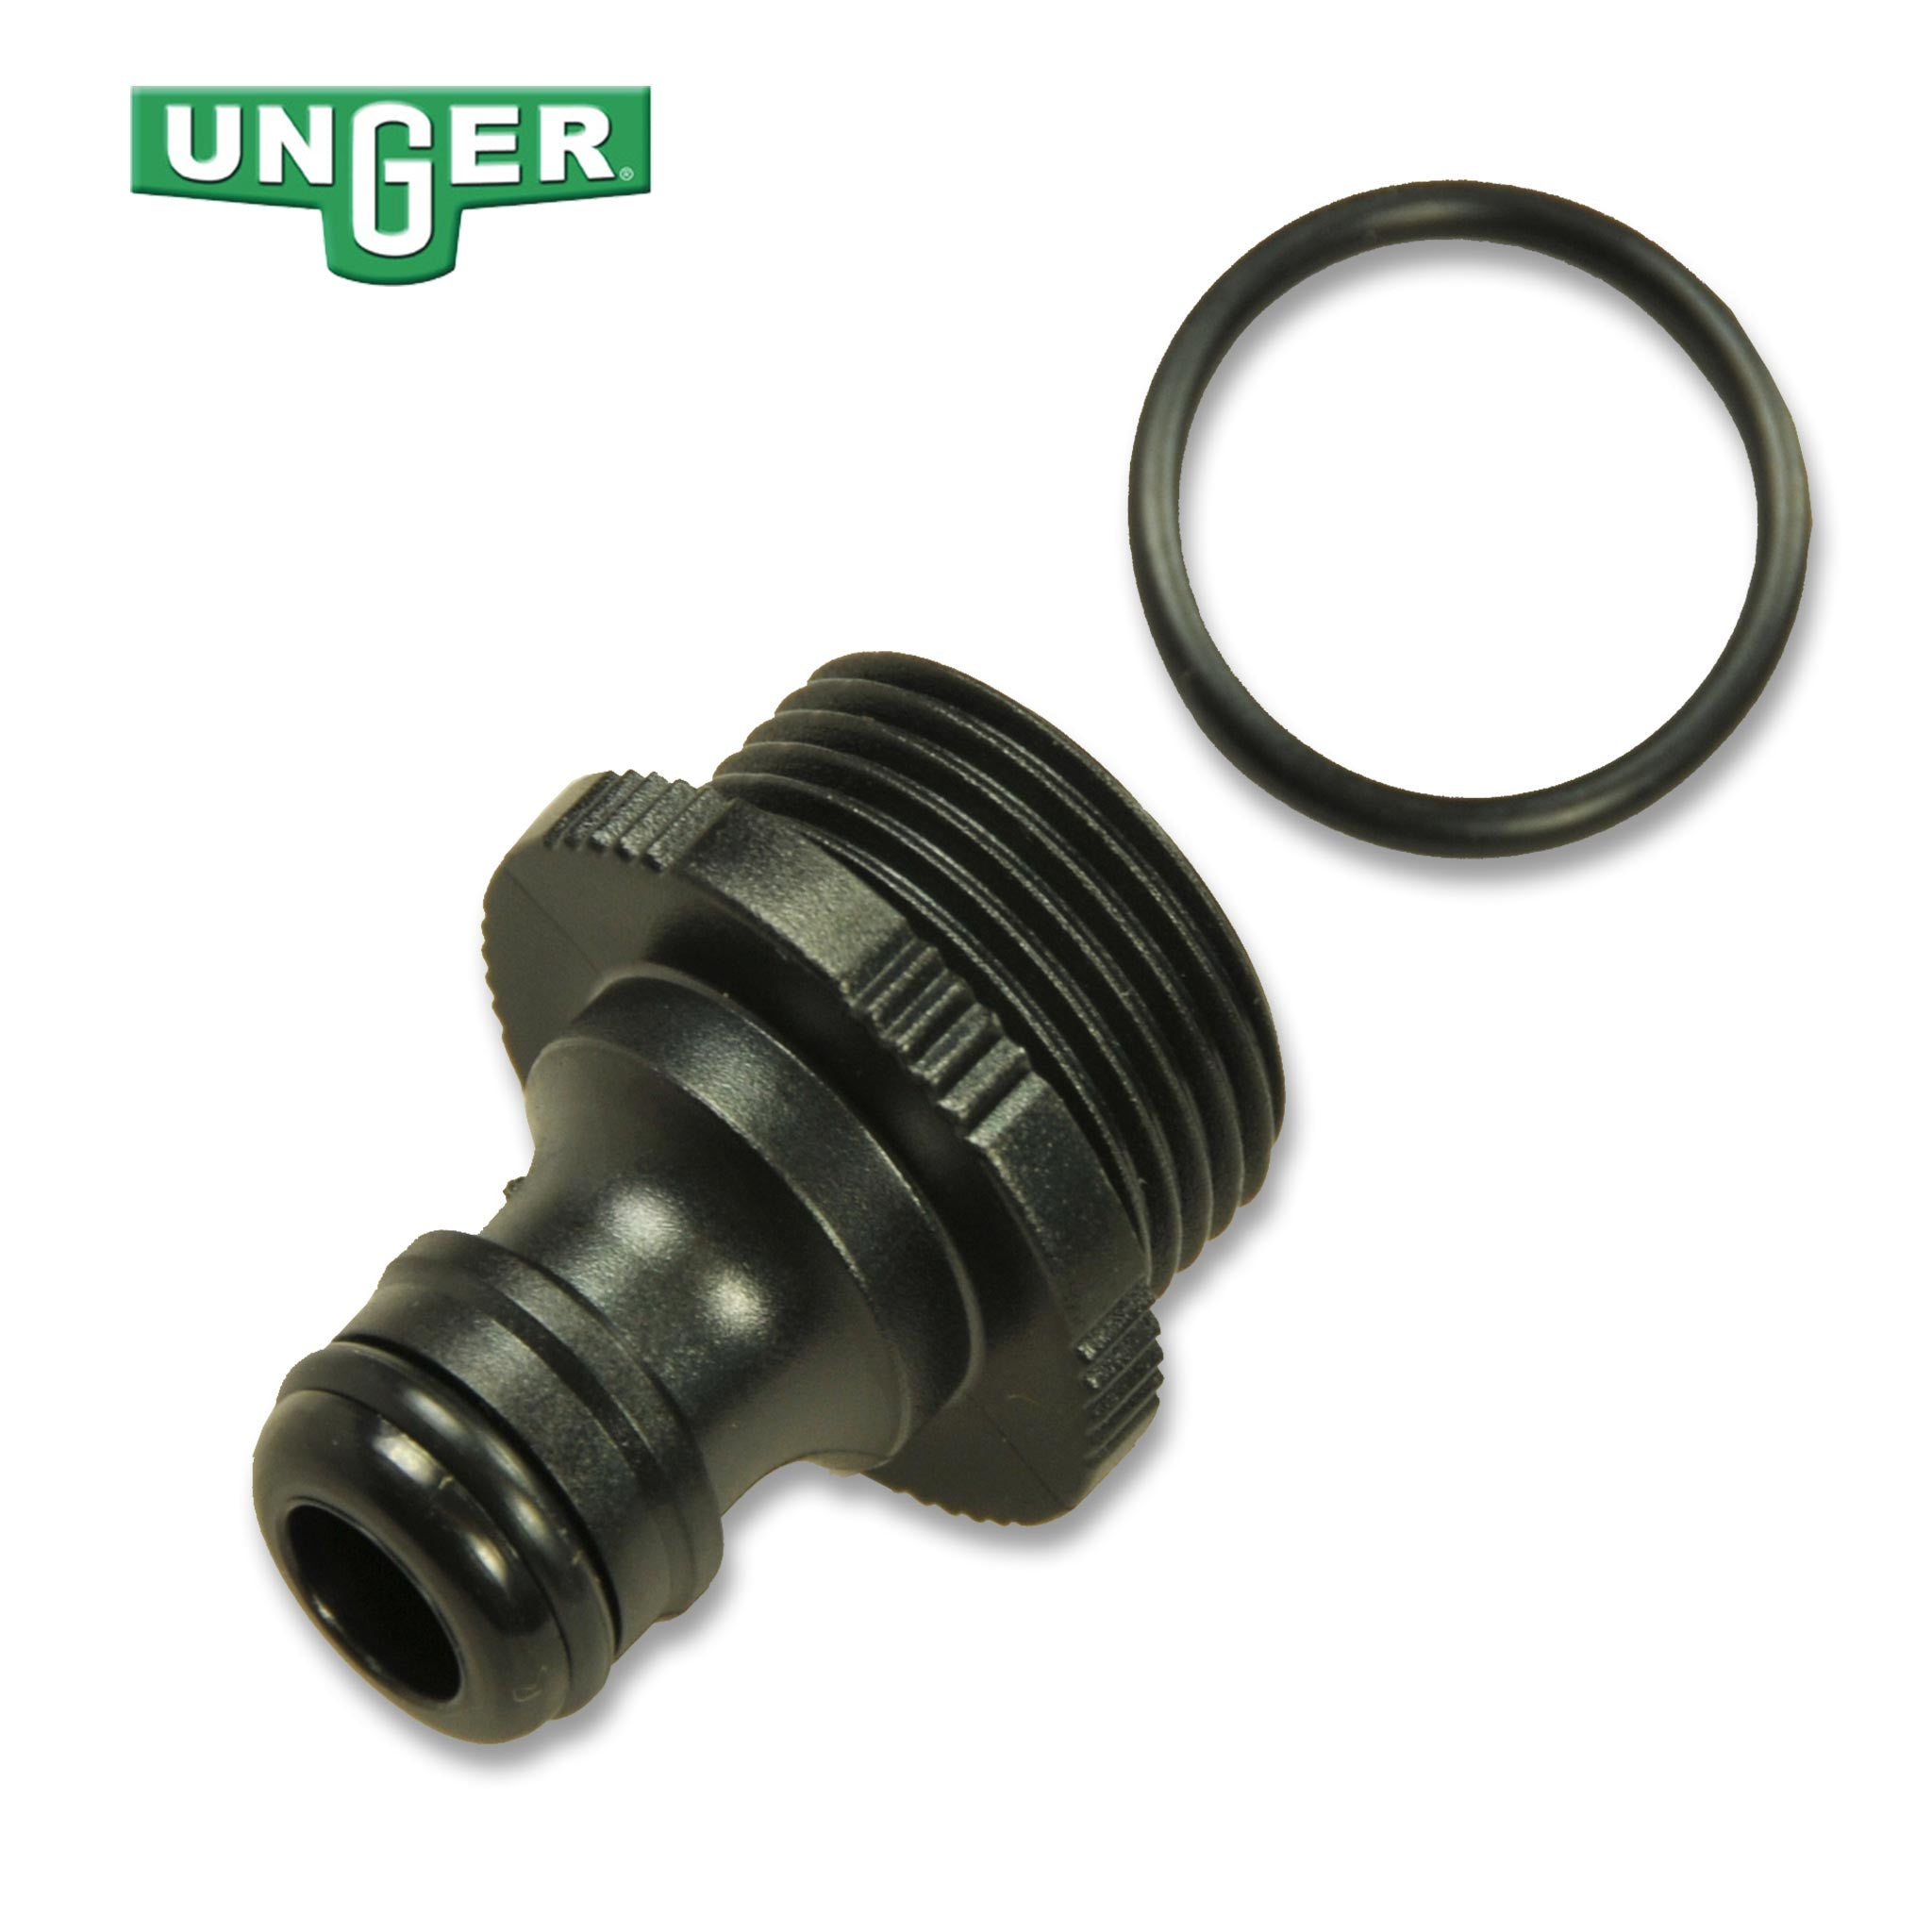 Unger HydroPower Di 12 Male Connector